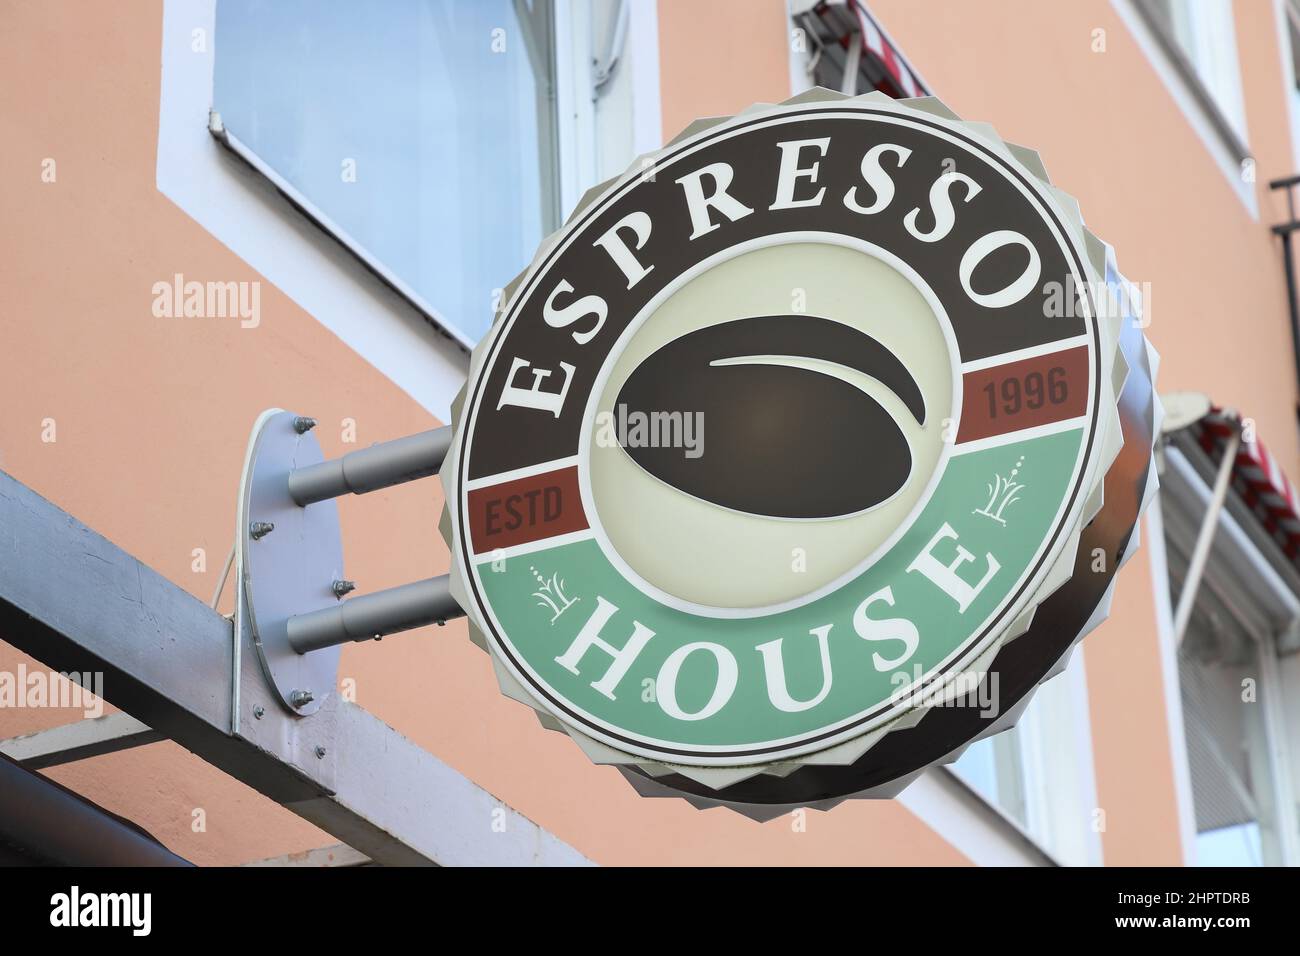 Sodertalje, Sweden - january 15, 2022: Close-up view of the coffeehouse chain Espresso house located at the Jarnagatan street. Stock Photo